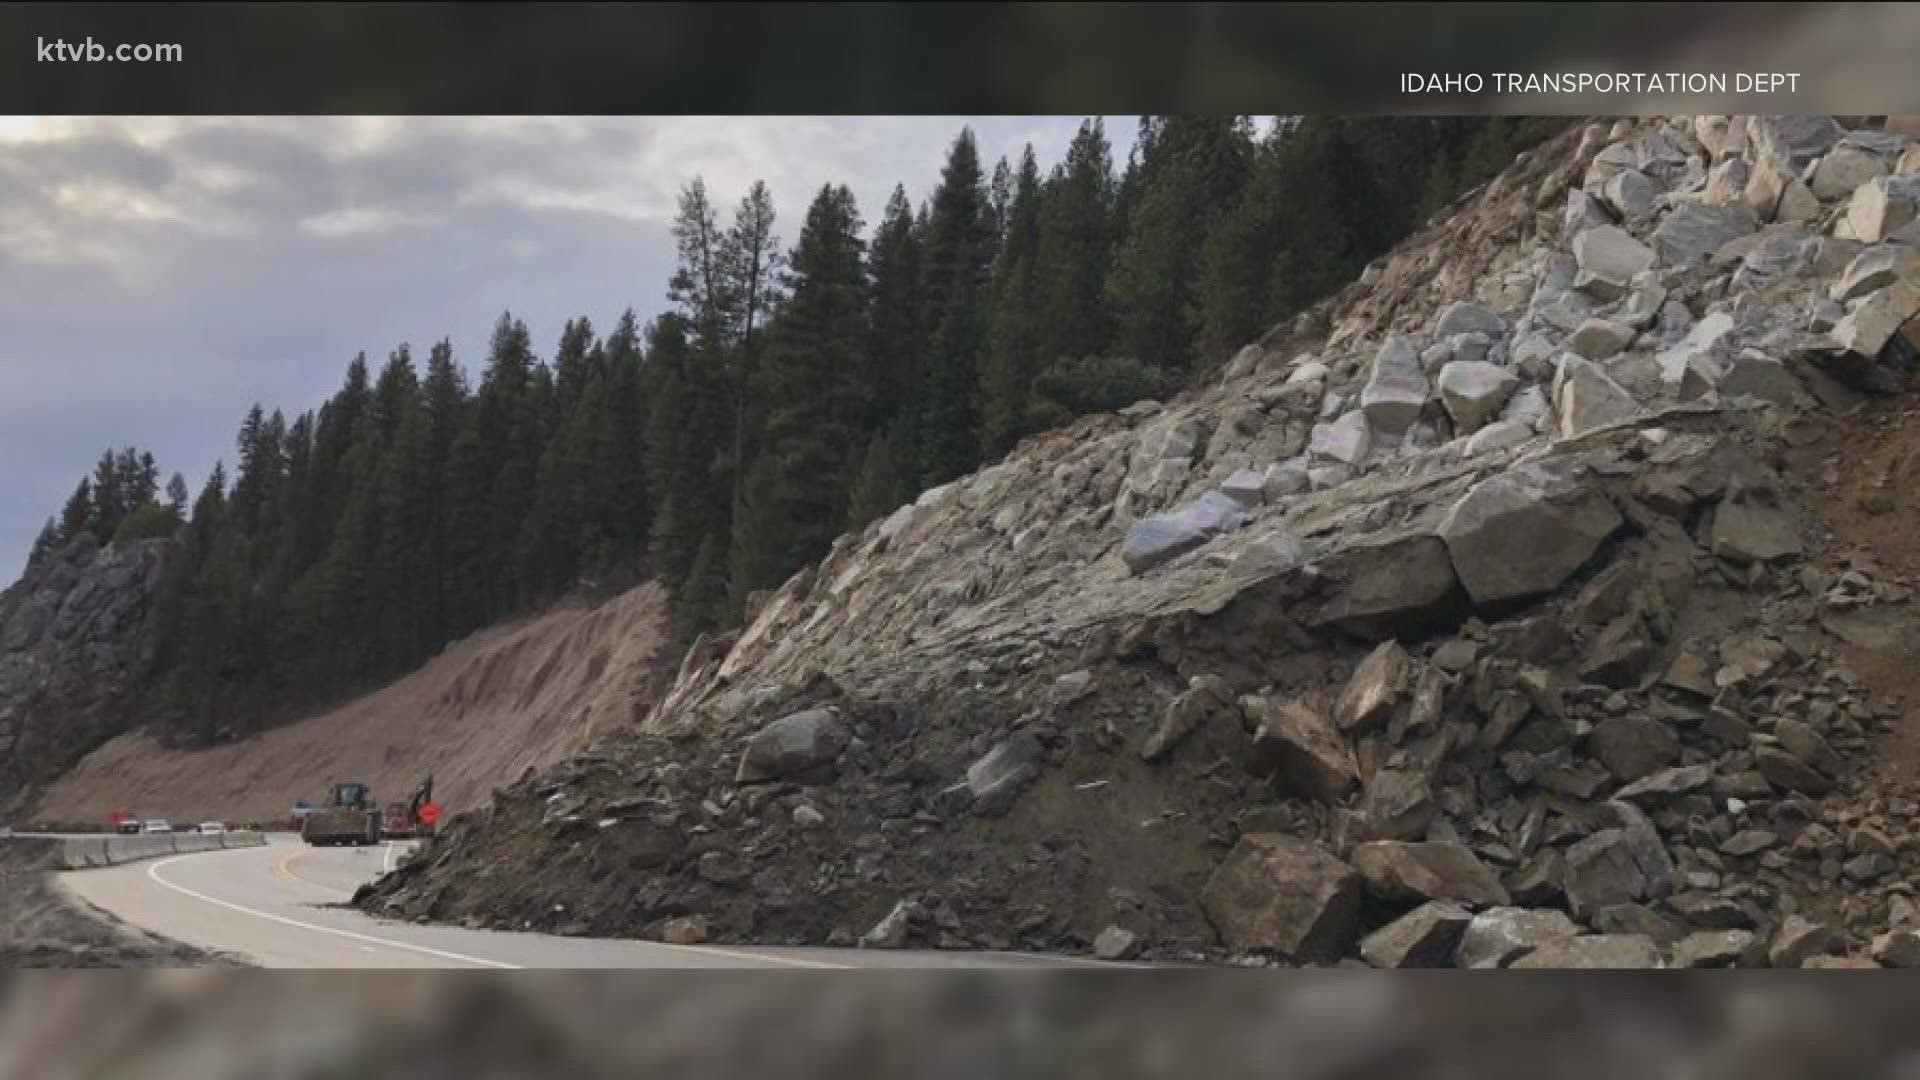 Since a rockslide blocked off Highway 55, Highway 95 has become the alternate route between the Treasure Valley and Valley County.